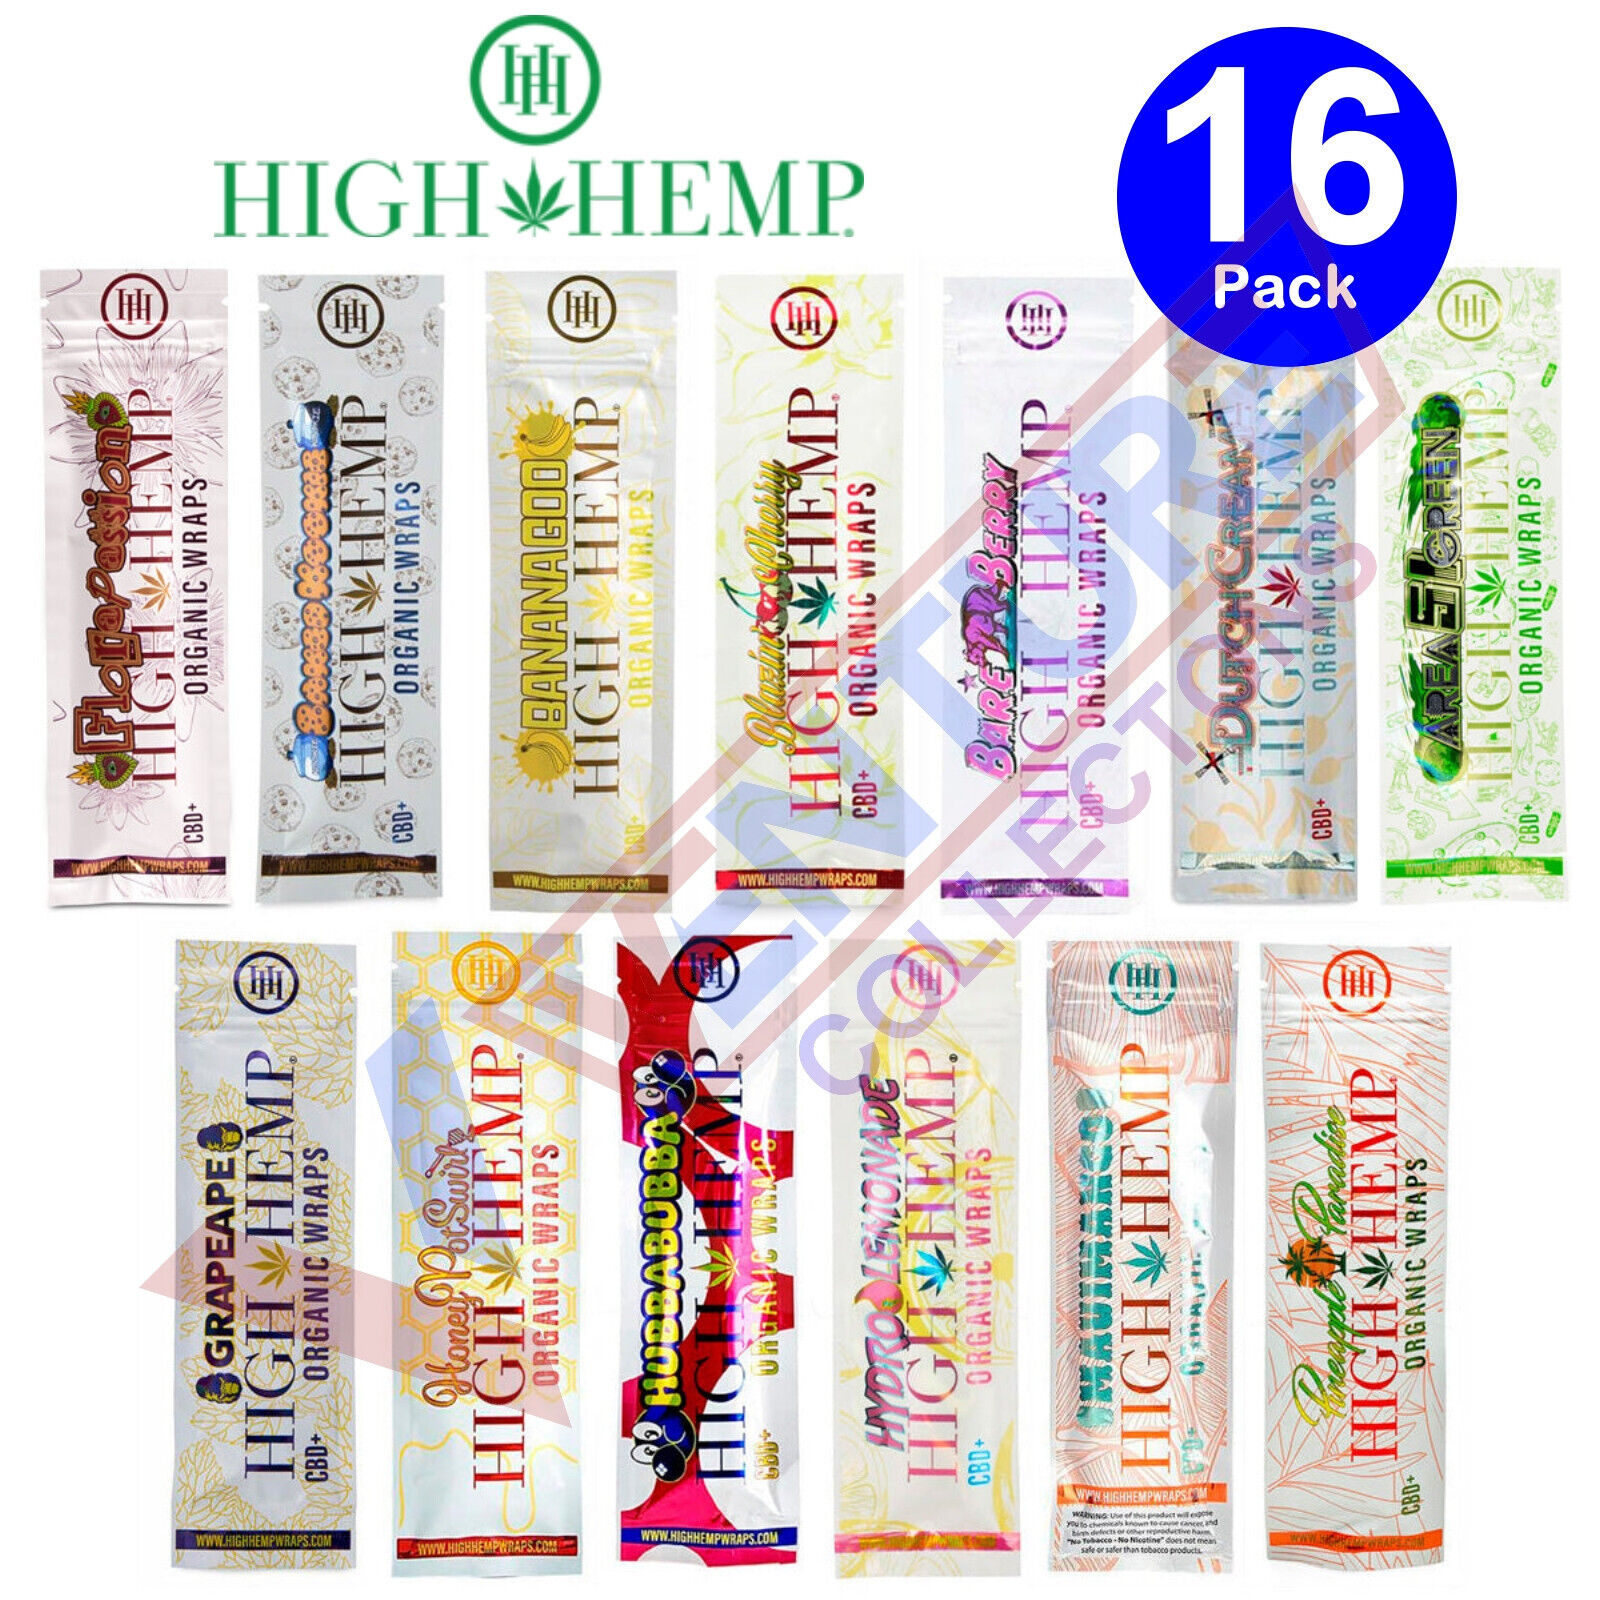 High H. Organic Wrap Rolling Paper Vegan ASSORTED FLAVOR VARIETY 16 Pouch of 2CT